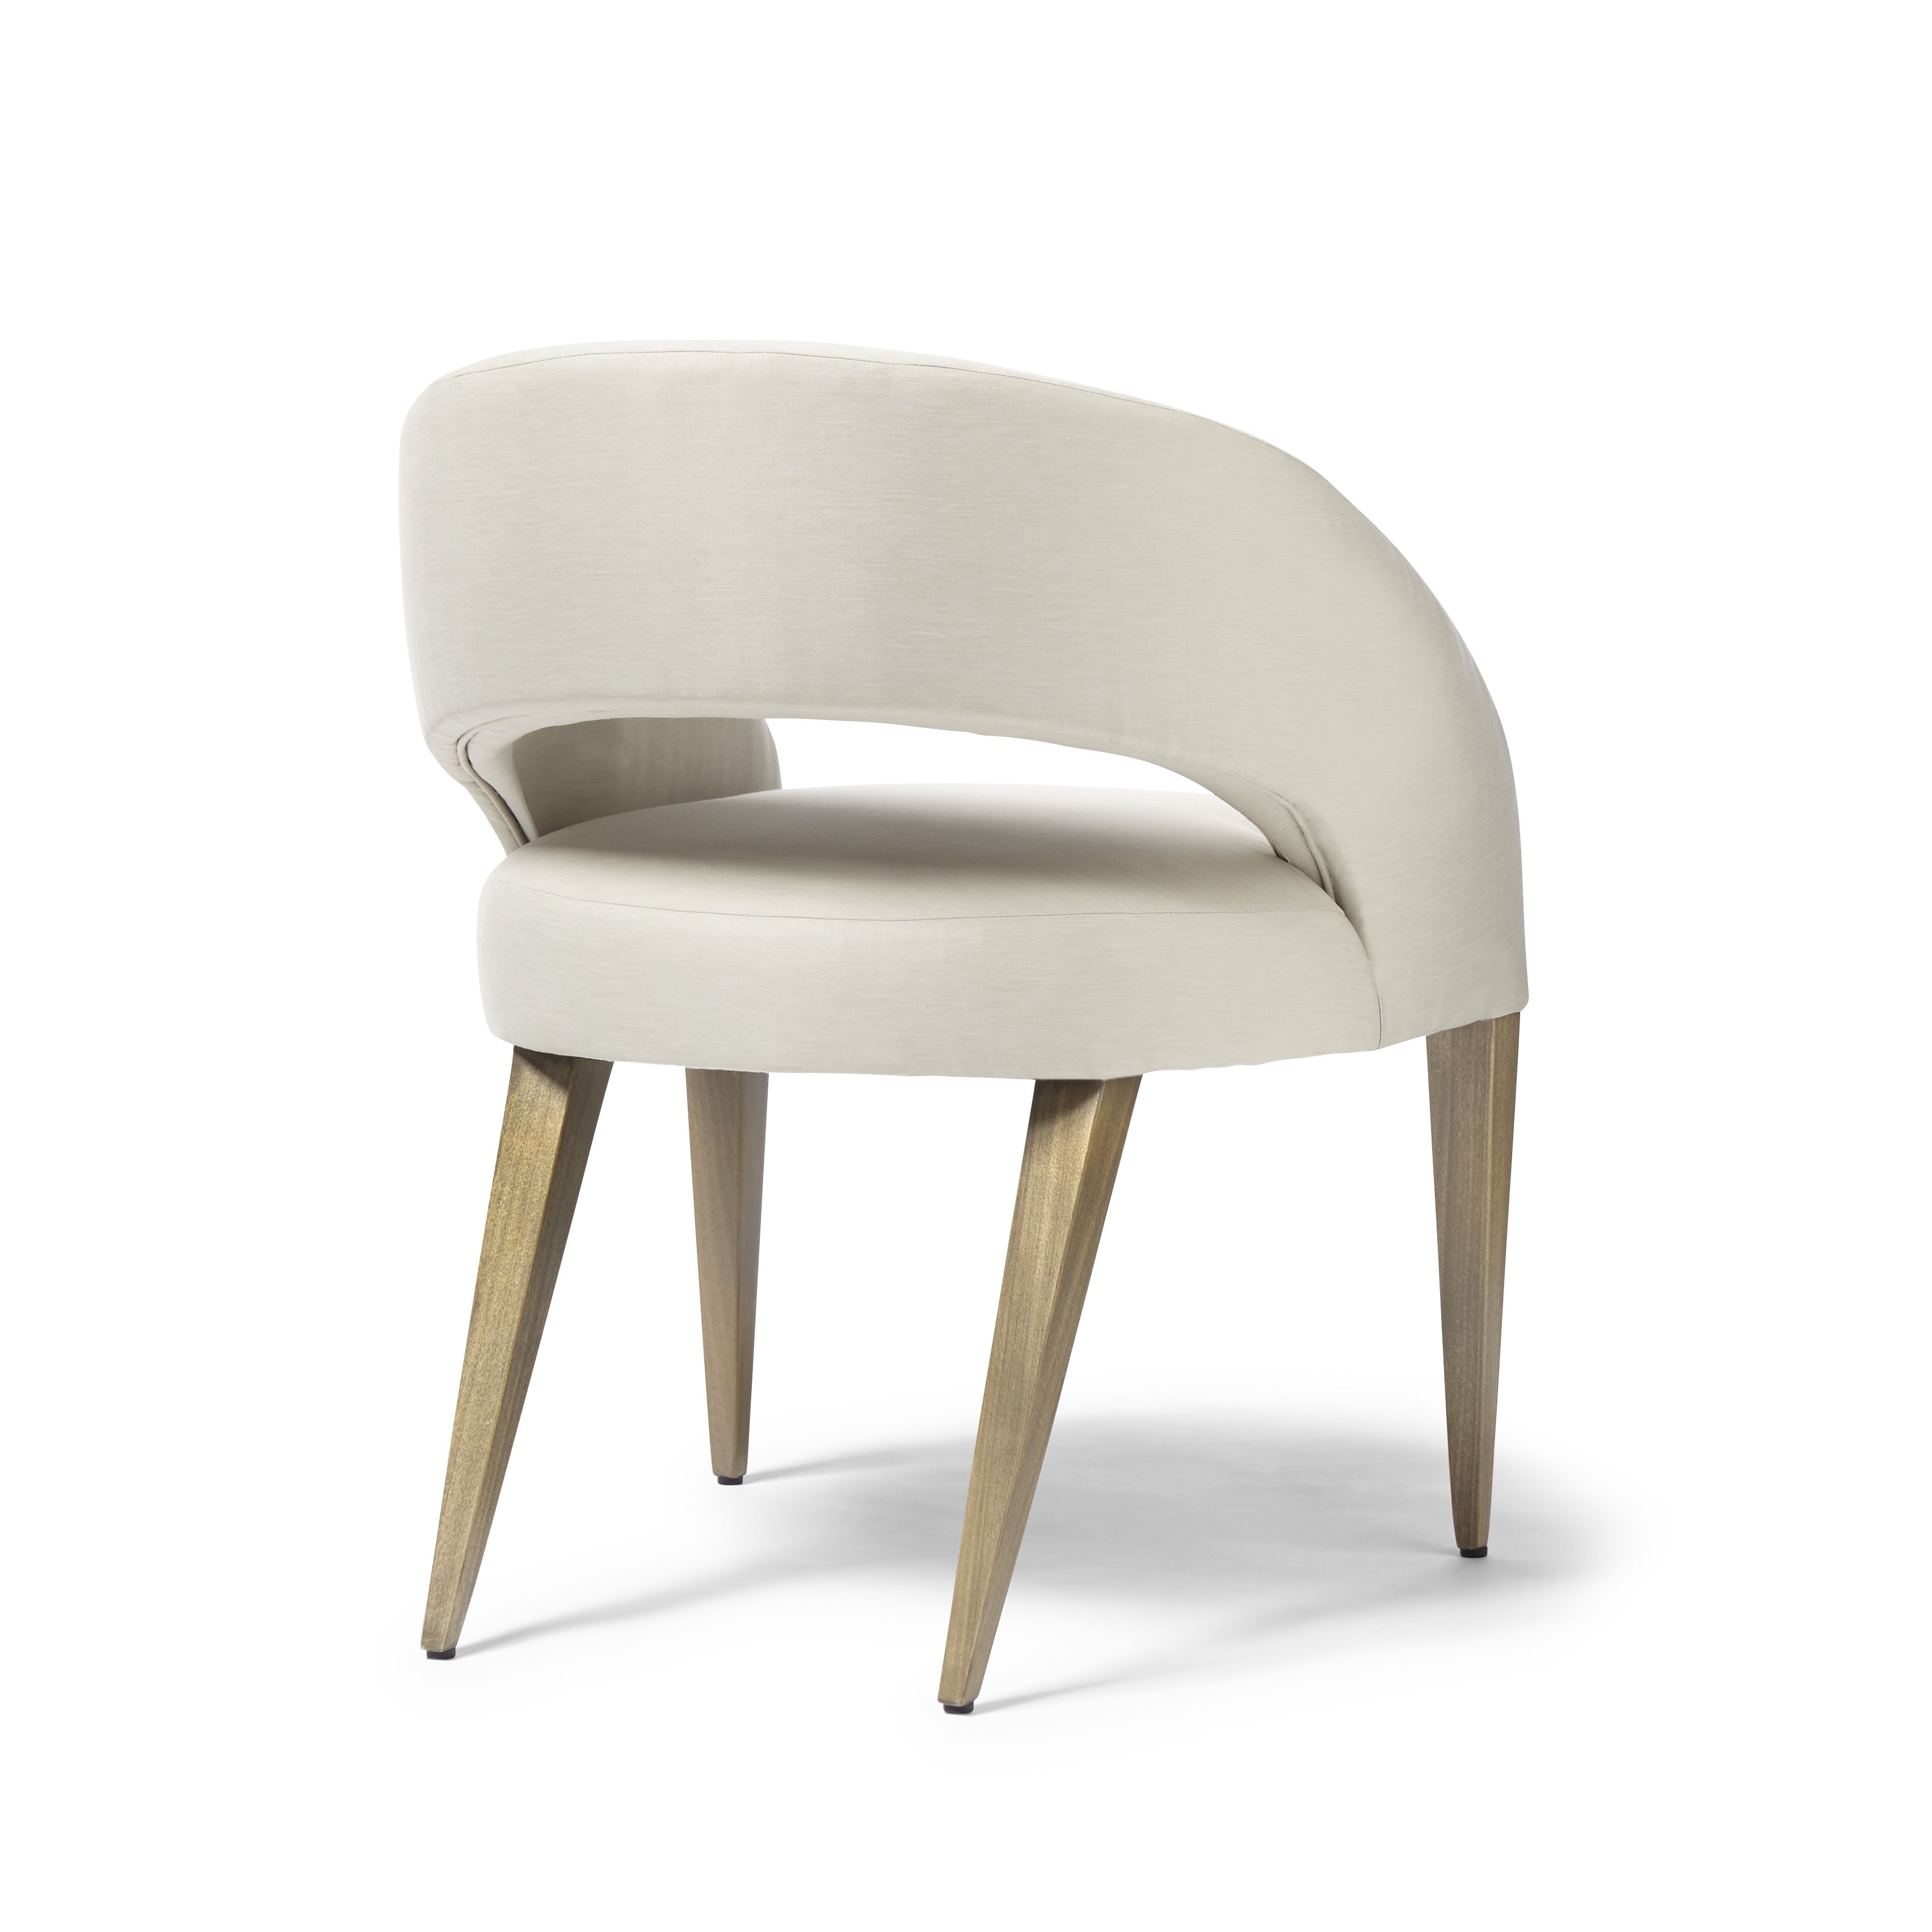 Clint Side Chairs Within Most Up To Date Melone Side Chair – Lazar (View 14 of 20)